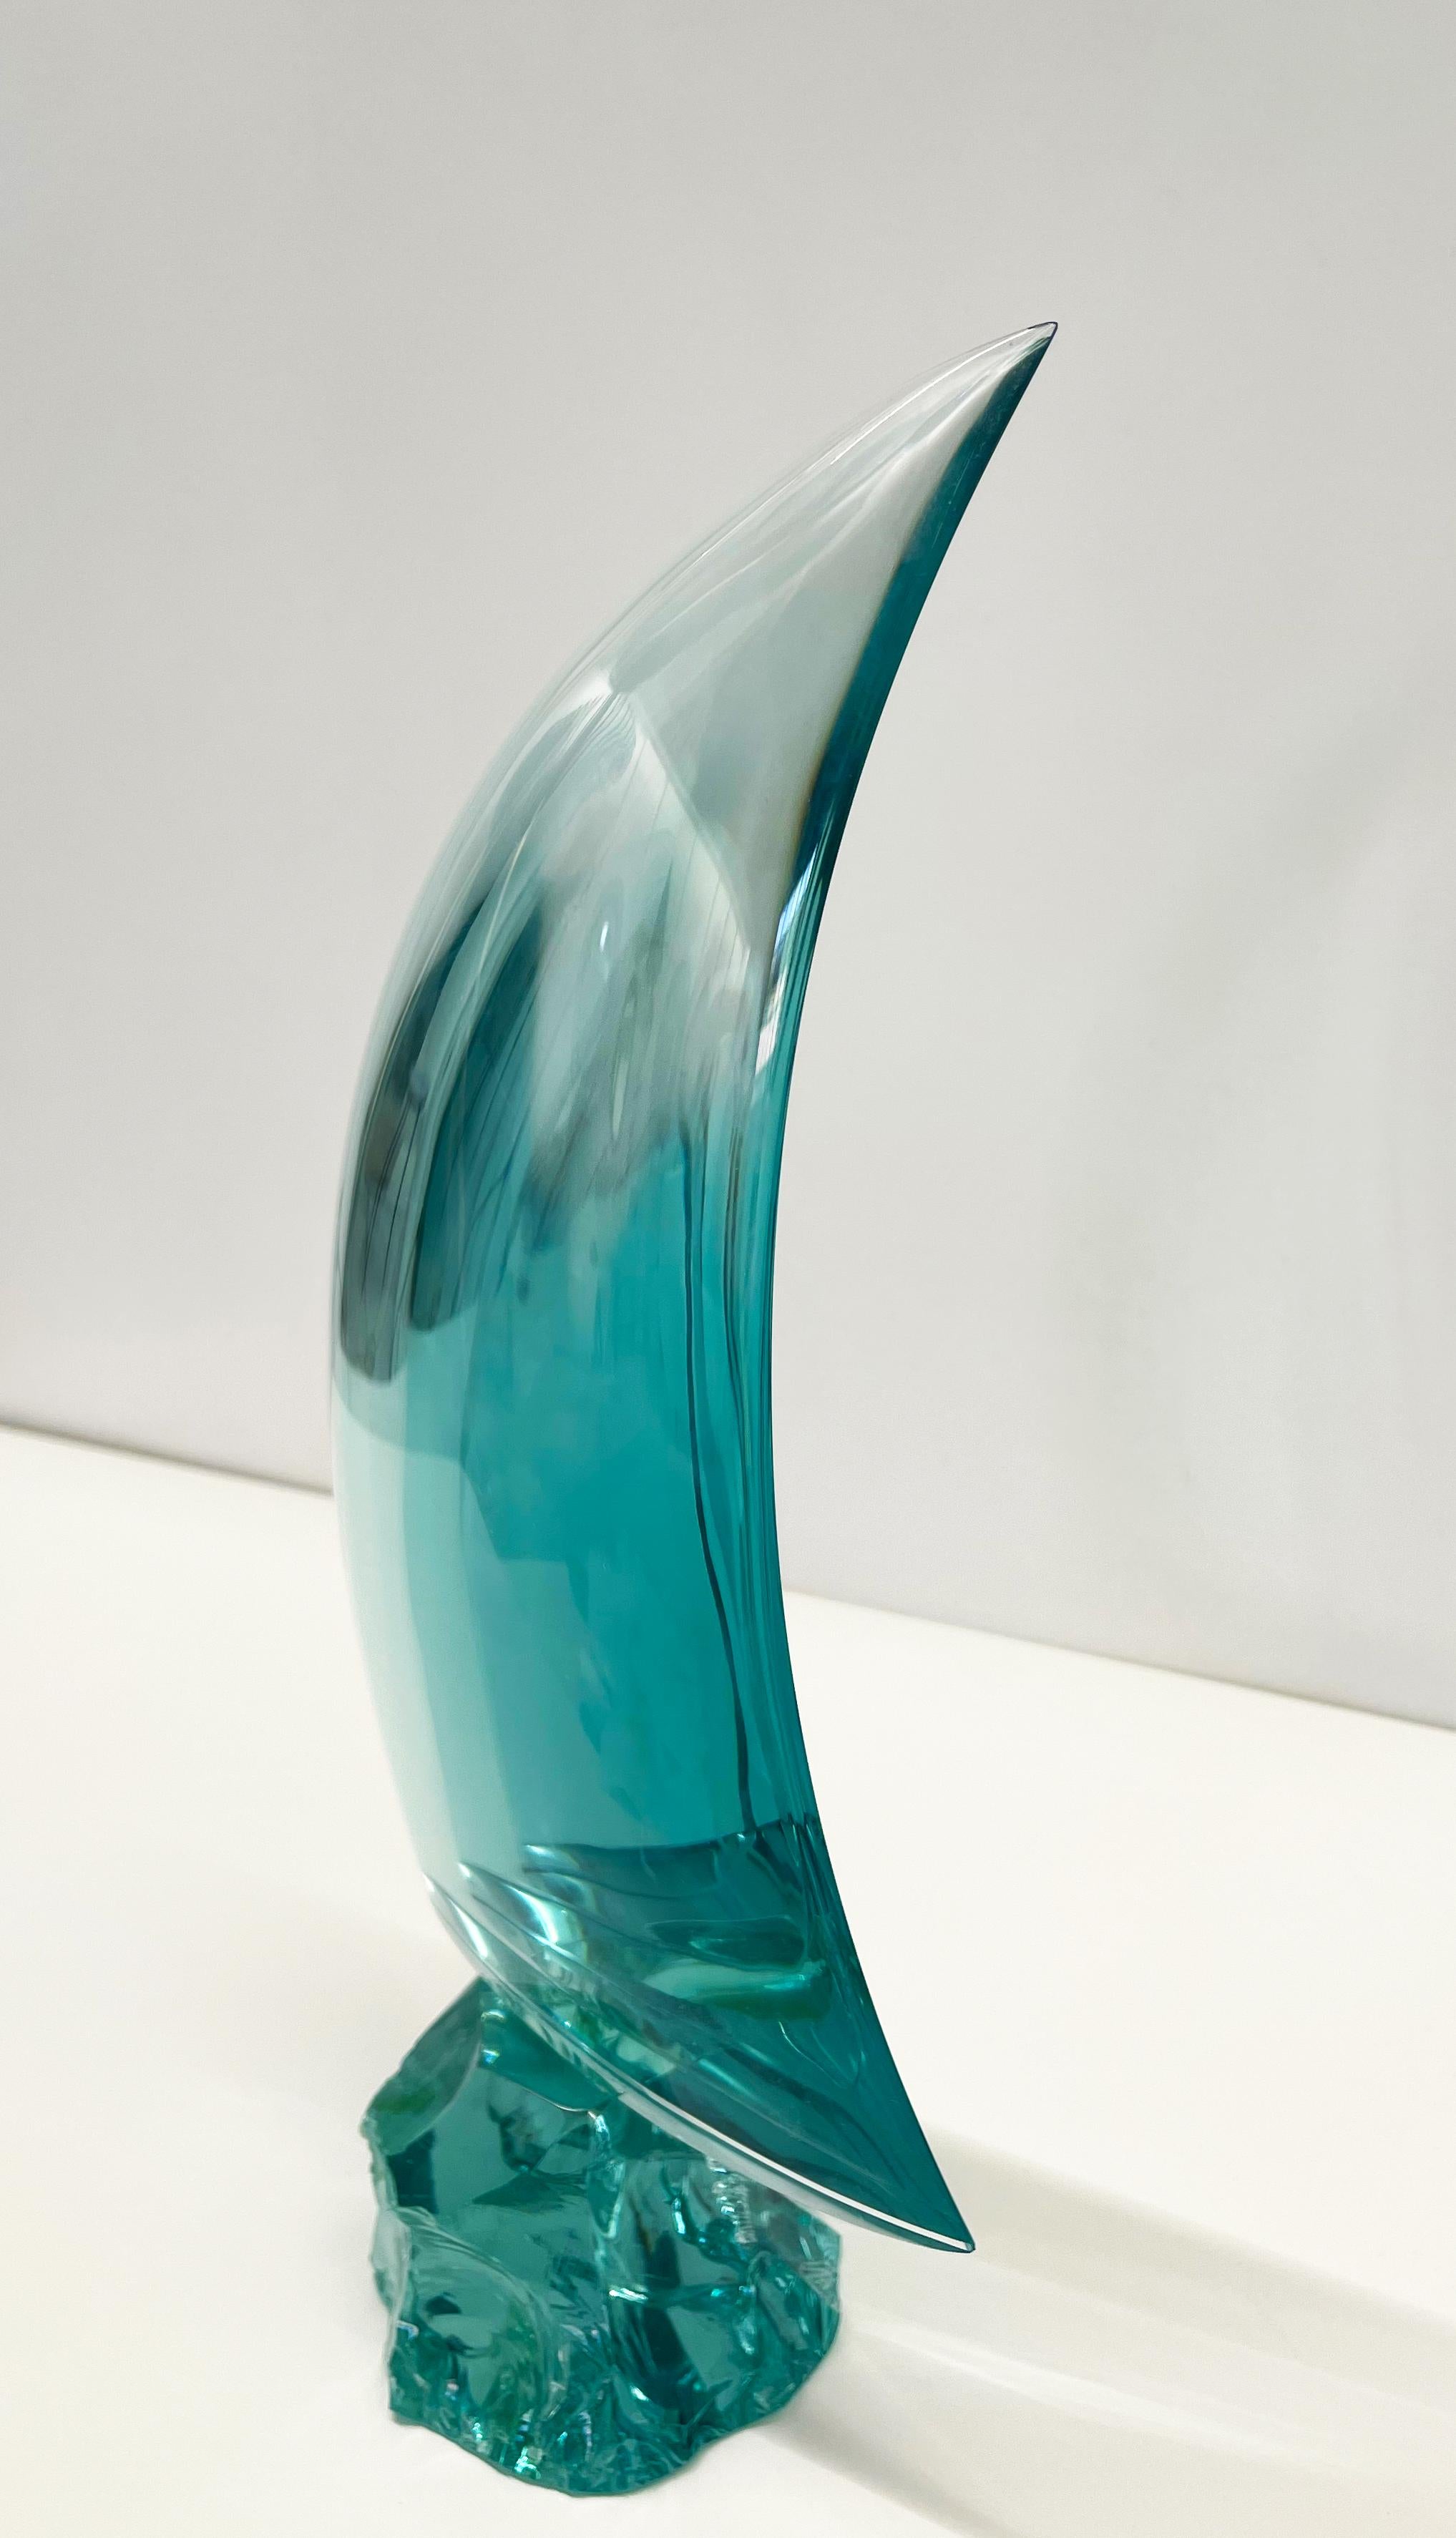 Glass Contemporary 'Sail' Handmade Aquamarine Crystal Sculpture by Ghirò Studio For Sale